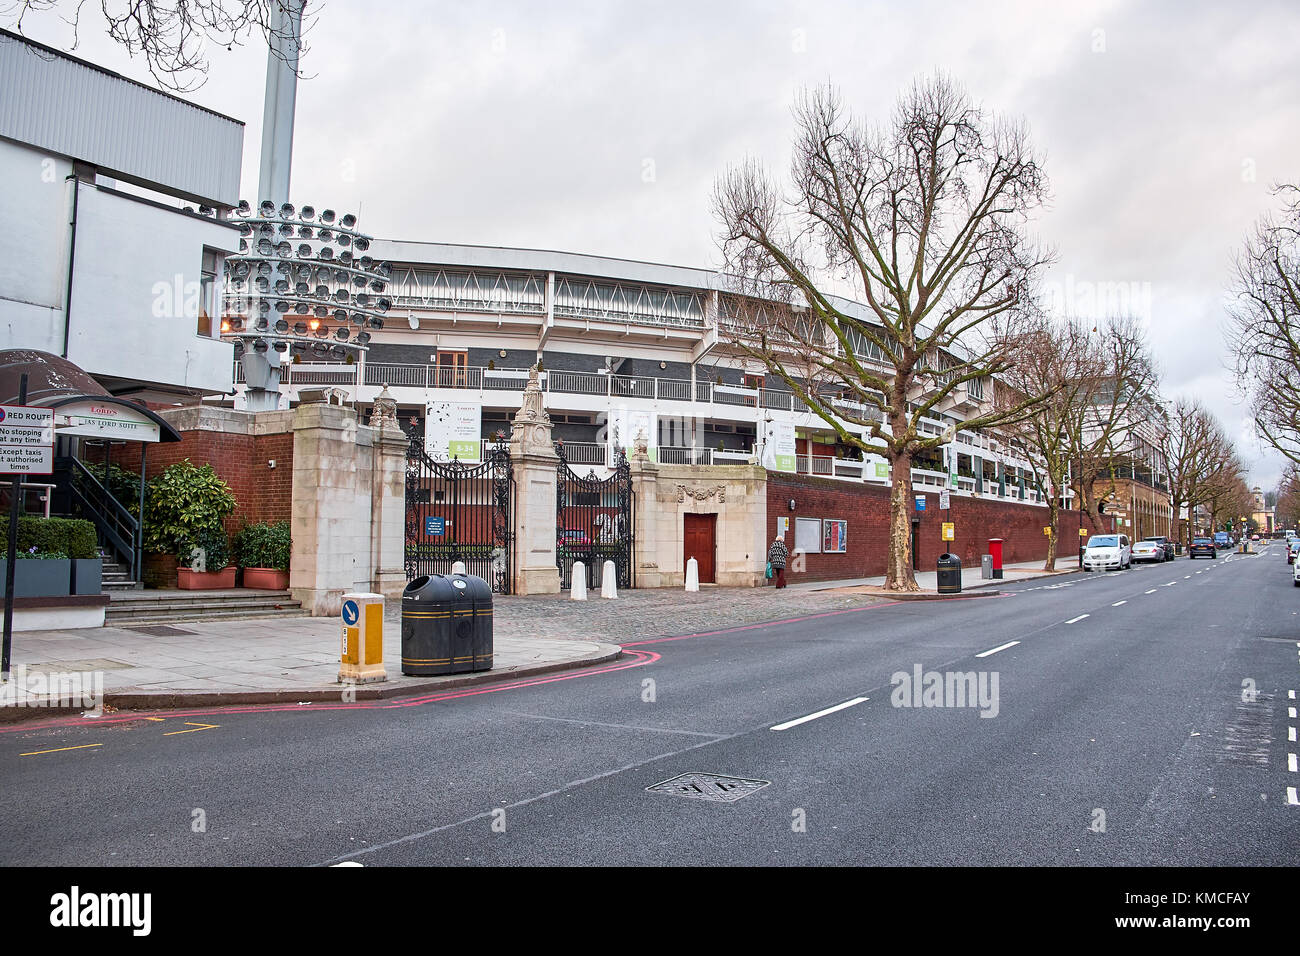 LONDON CITY - DECEMBER 25, 2016: One of the entrances to Lord's Cricket Ground, closed with an iron gate Stock Photo